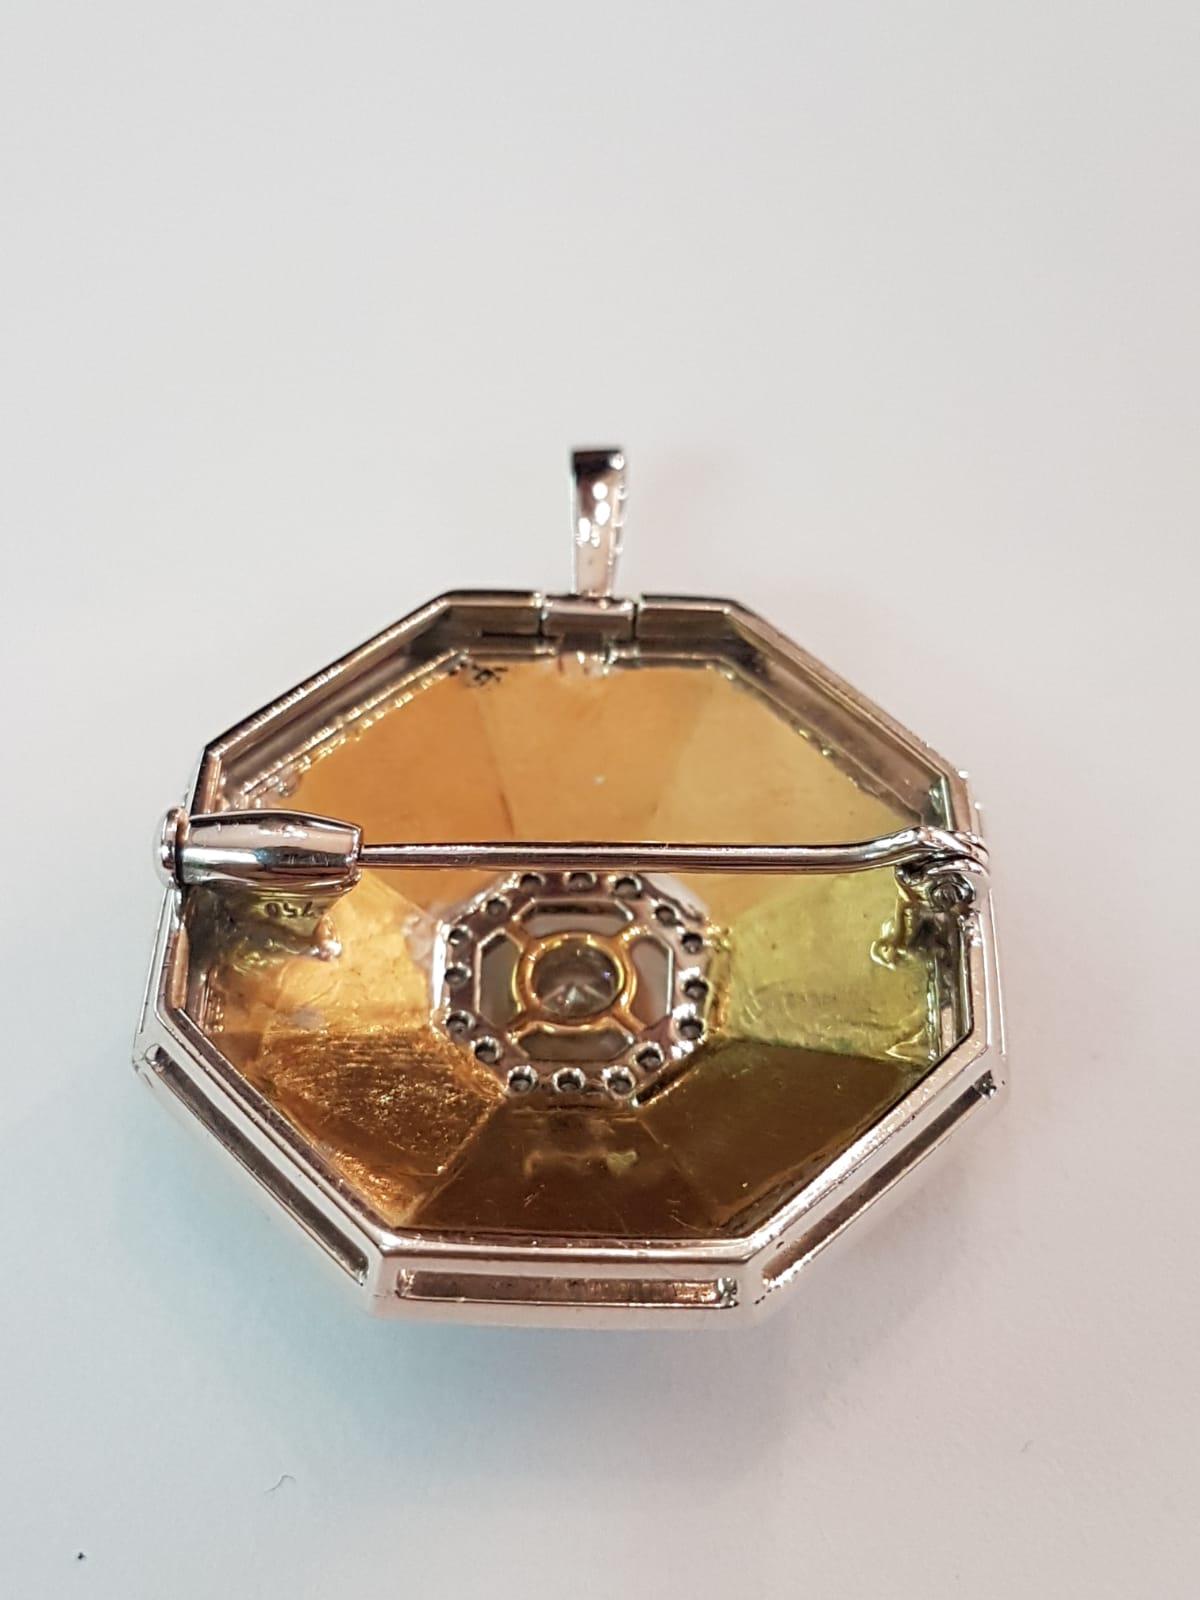 Contemporary Fired Enamel Diamond 18 Karat White and Yellow Gold Pendant or Brooch For Sale